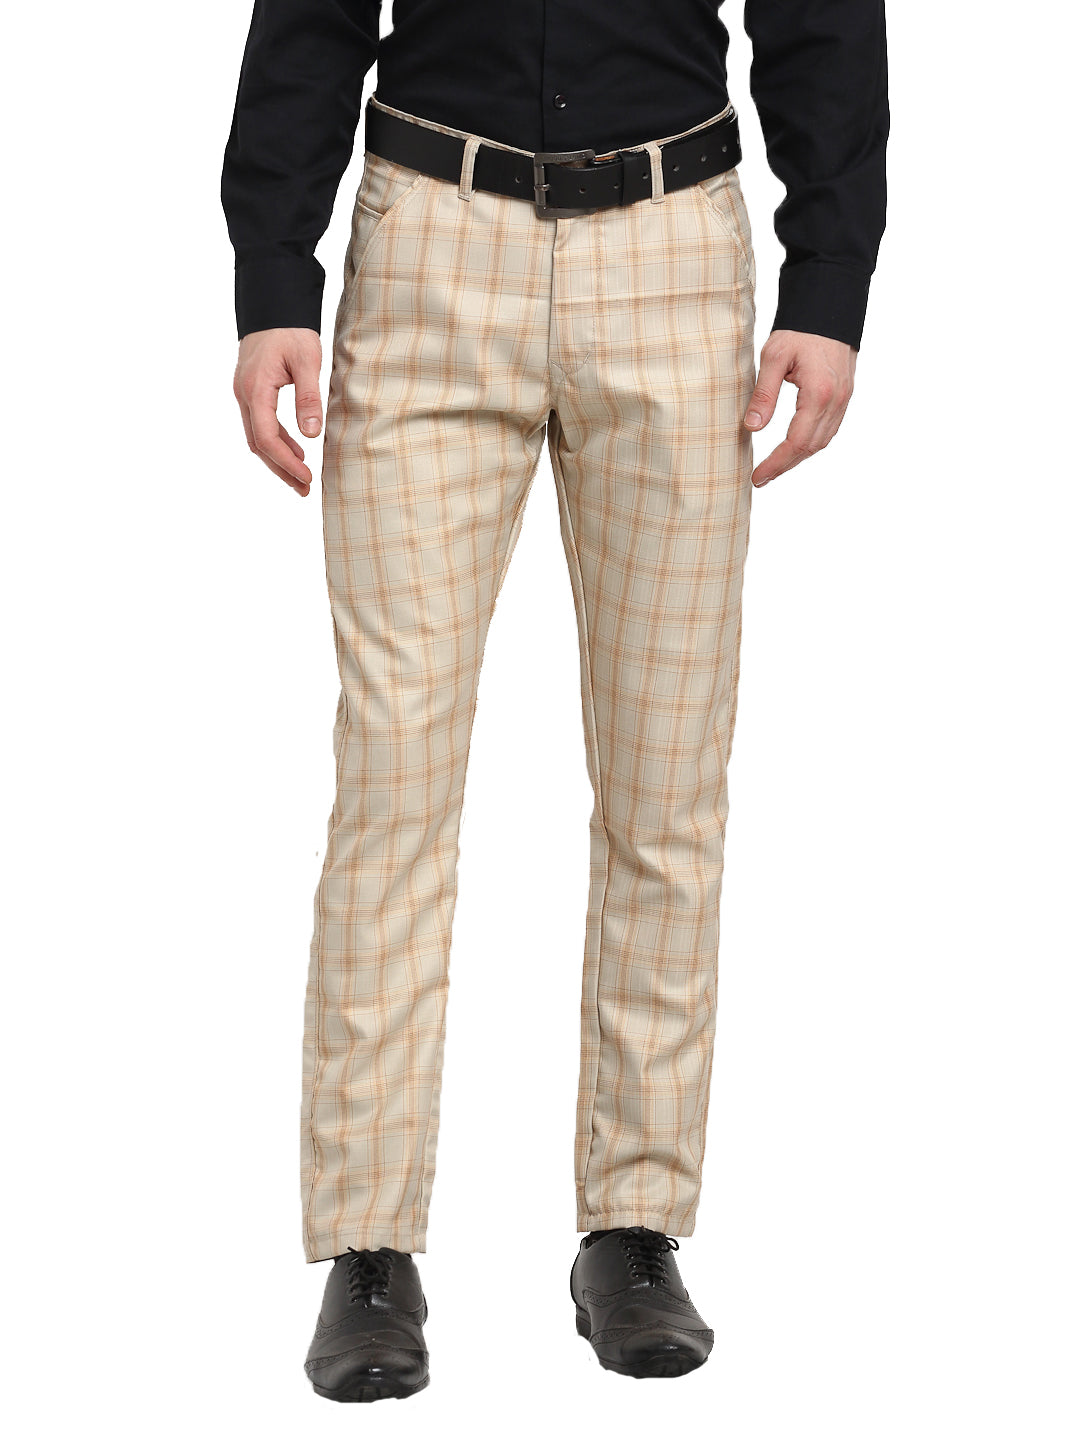 IVN High Quality Raw Material Mens Checkered Cotton Trouser, Gender : Male  at Best Price in Saharanpur